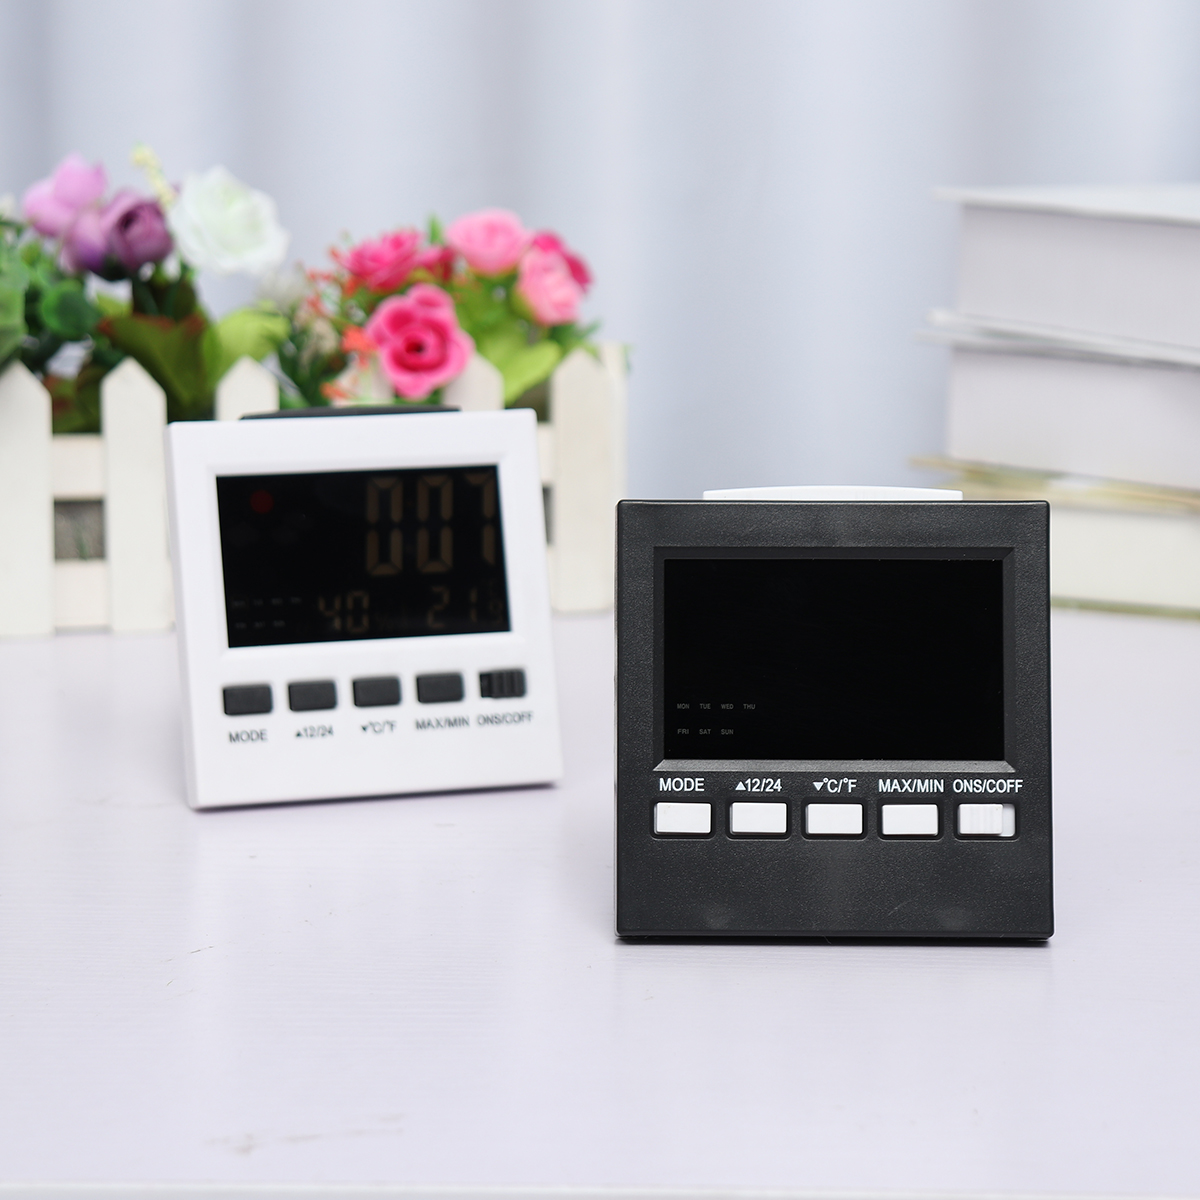 LED-Digital-Alarm-Clock-Temperature-Humidity-Weather-Color-Display-With-Backlit-1671428-1